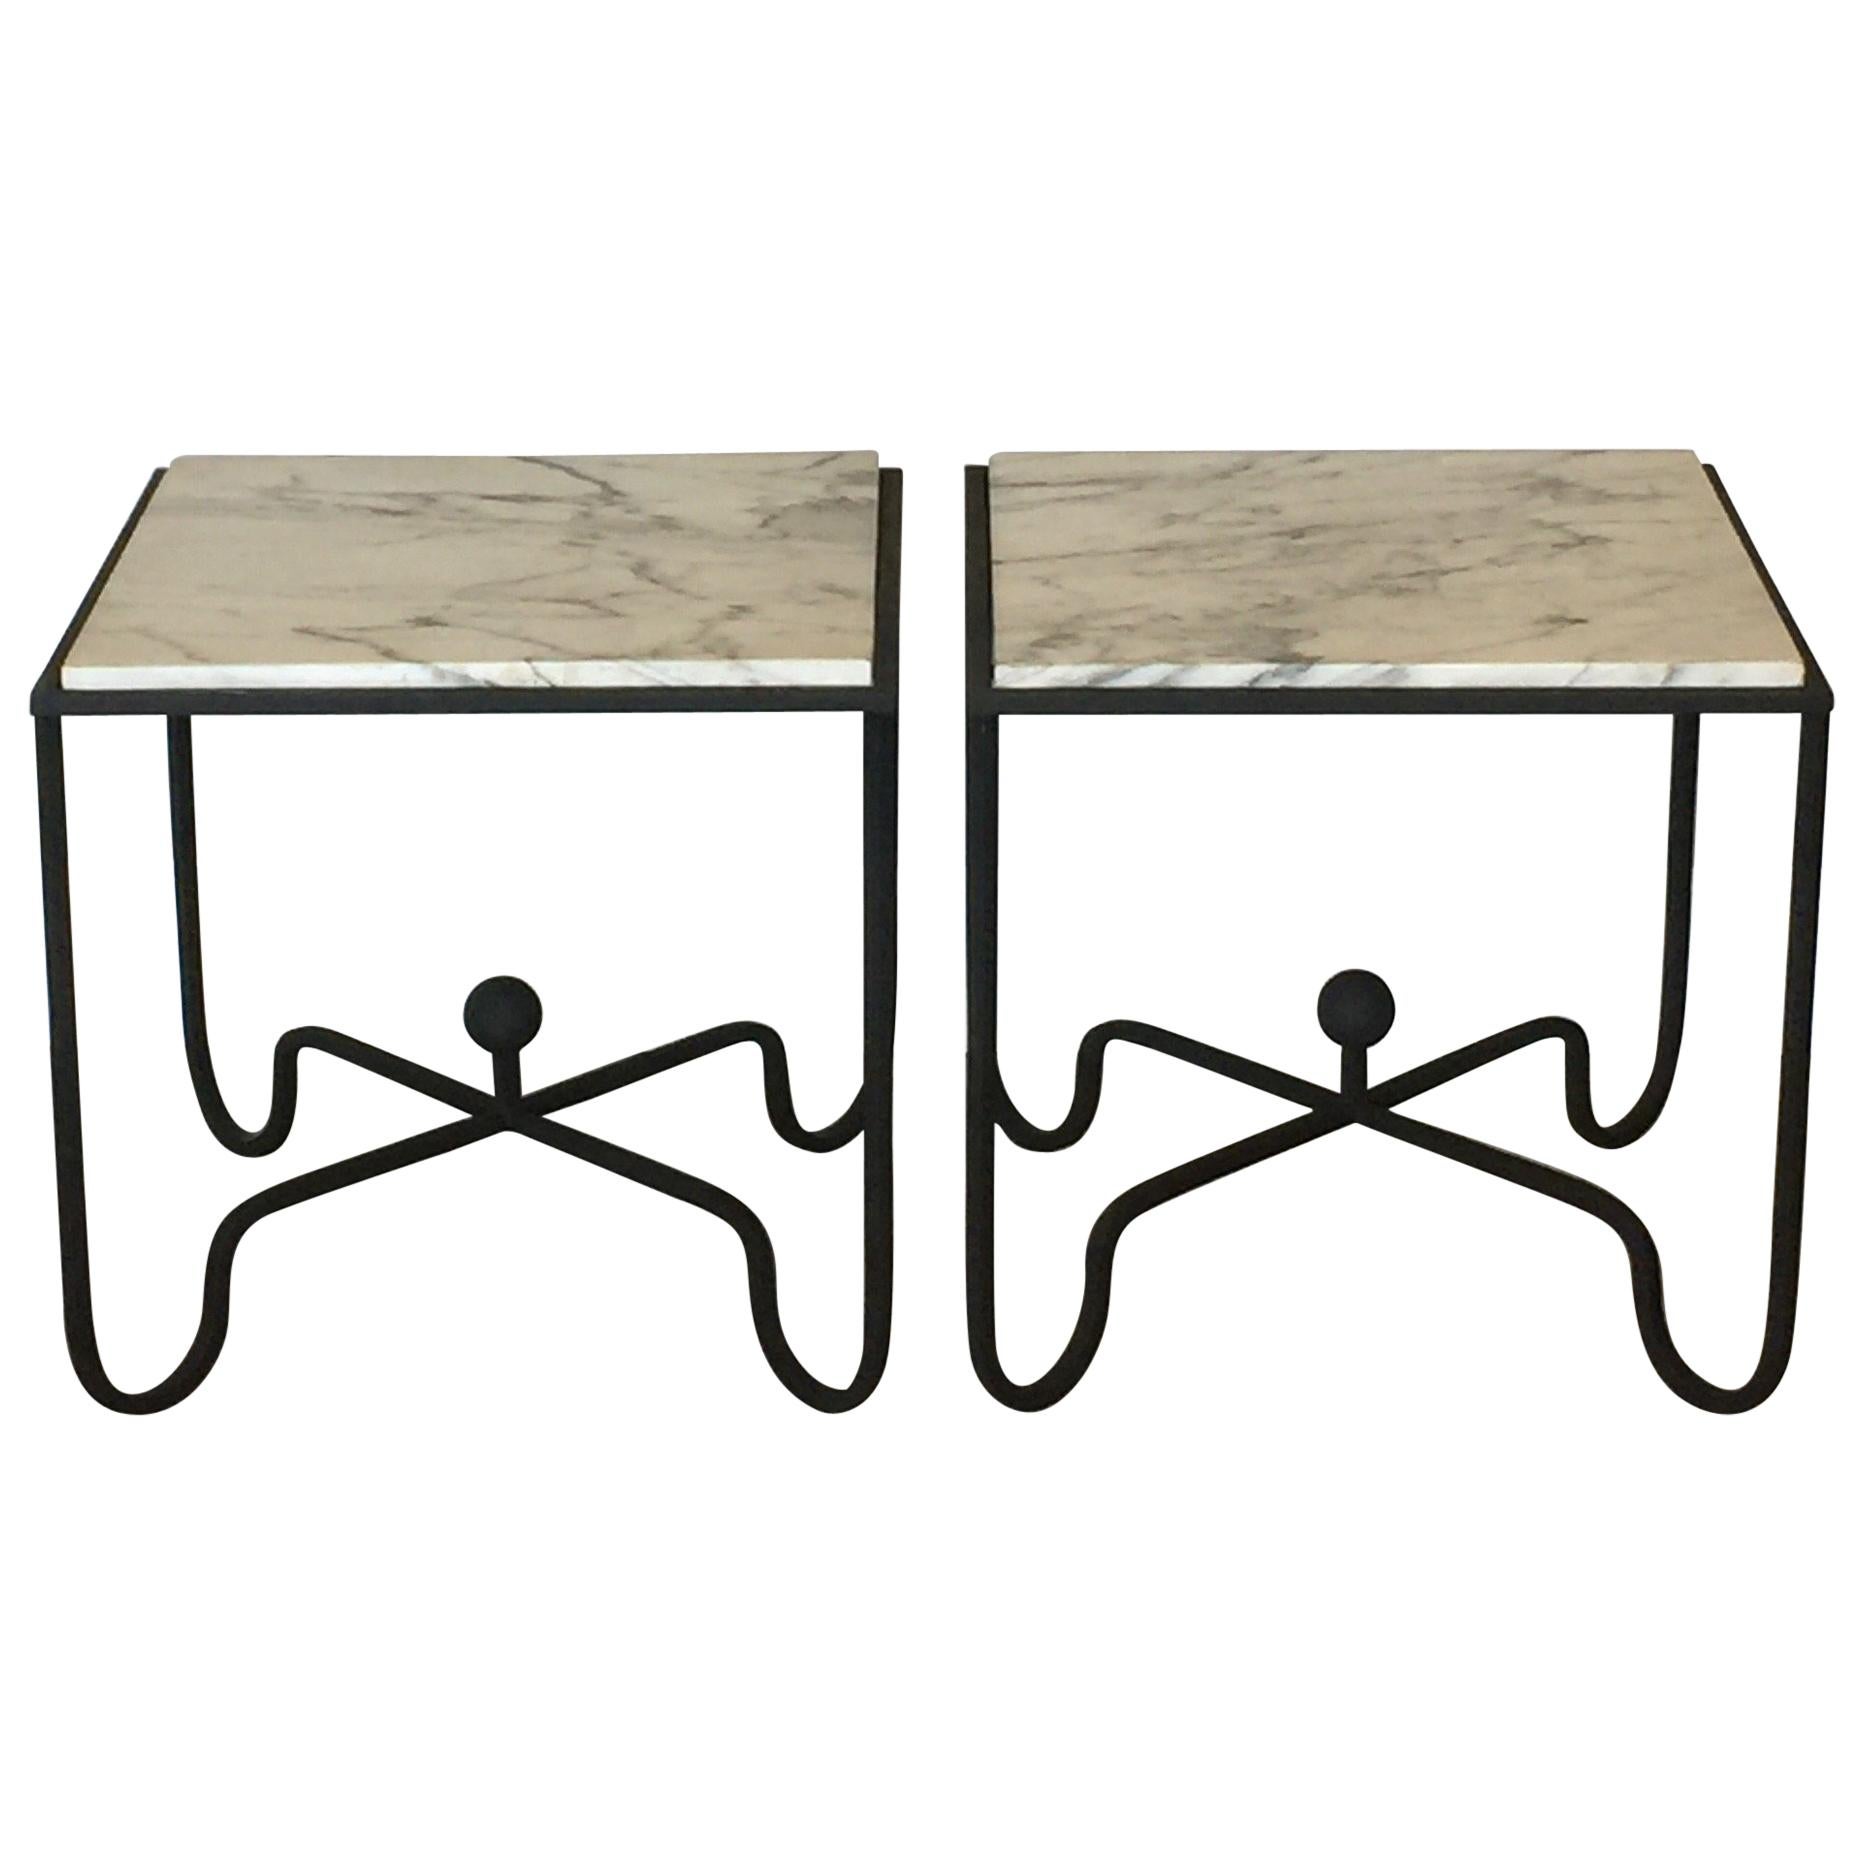 Pair of Wrought Iron and Marble 'Entretoise' Side Tables by Design Frères